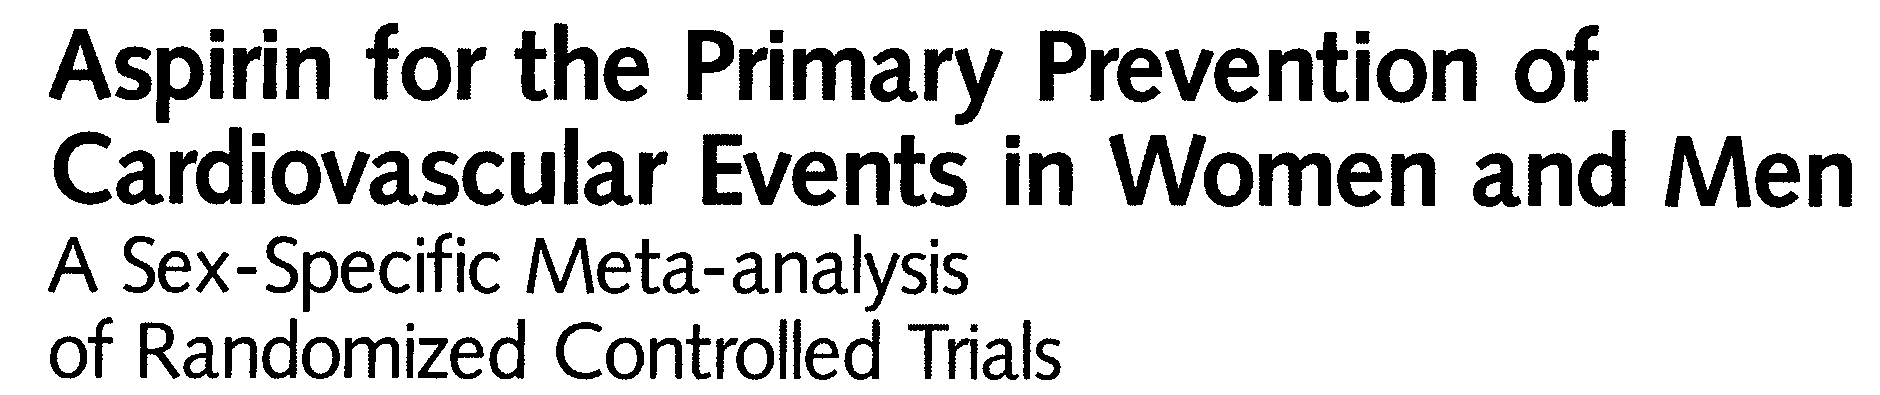 Database: 6 trials with a total of 95,456 individuals; 3 trials included only men, 1 included only women and 2 included both sexes Conclusions Aspirin reduced